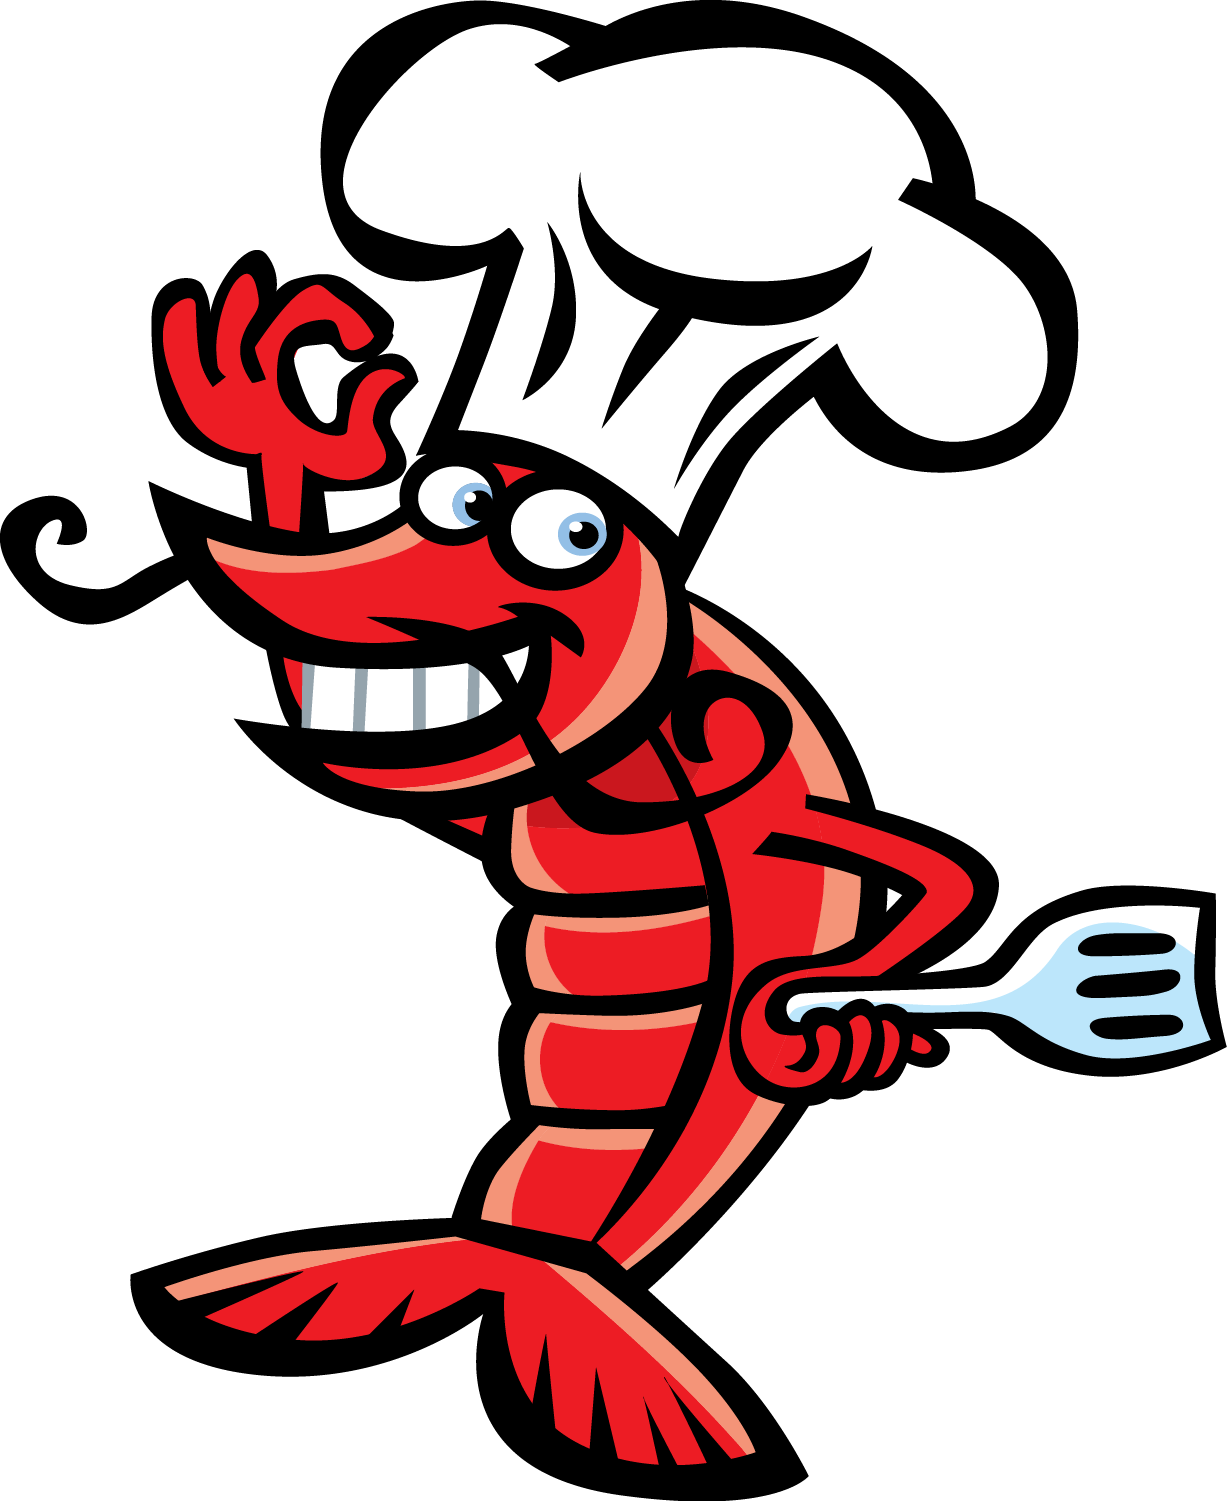 Seafood clipart seafood chef. Free download best on